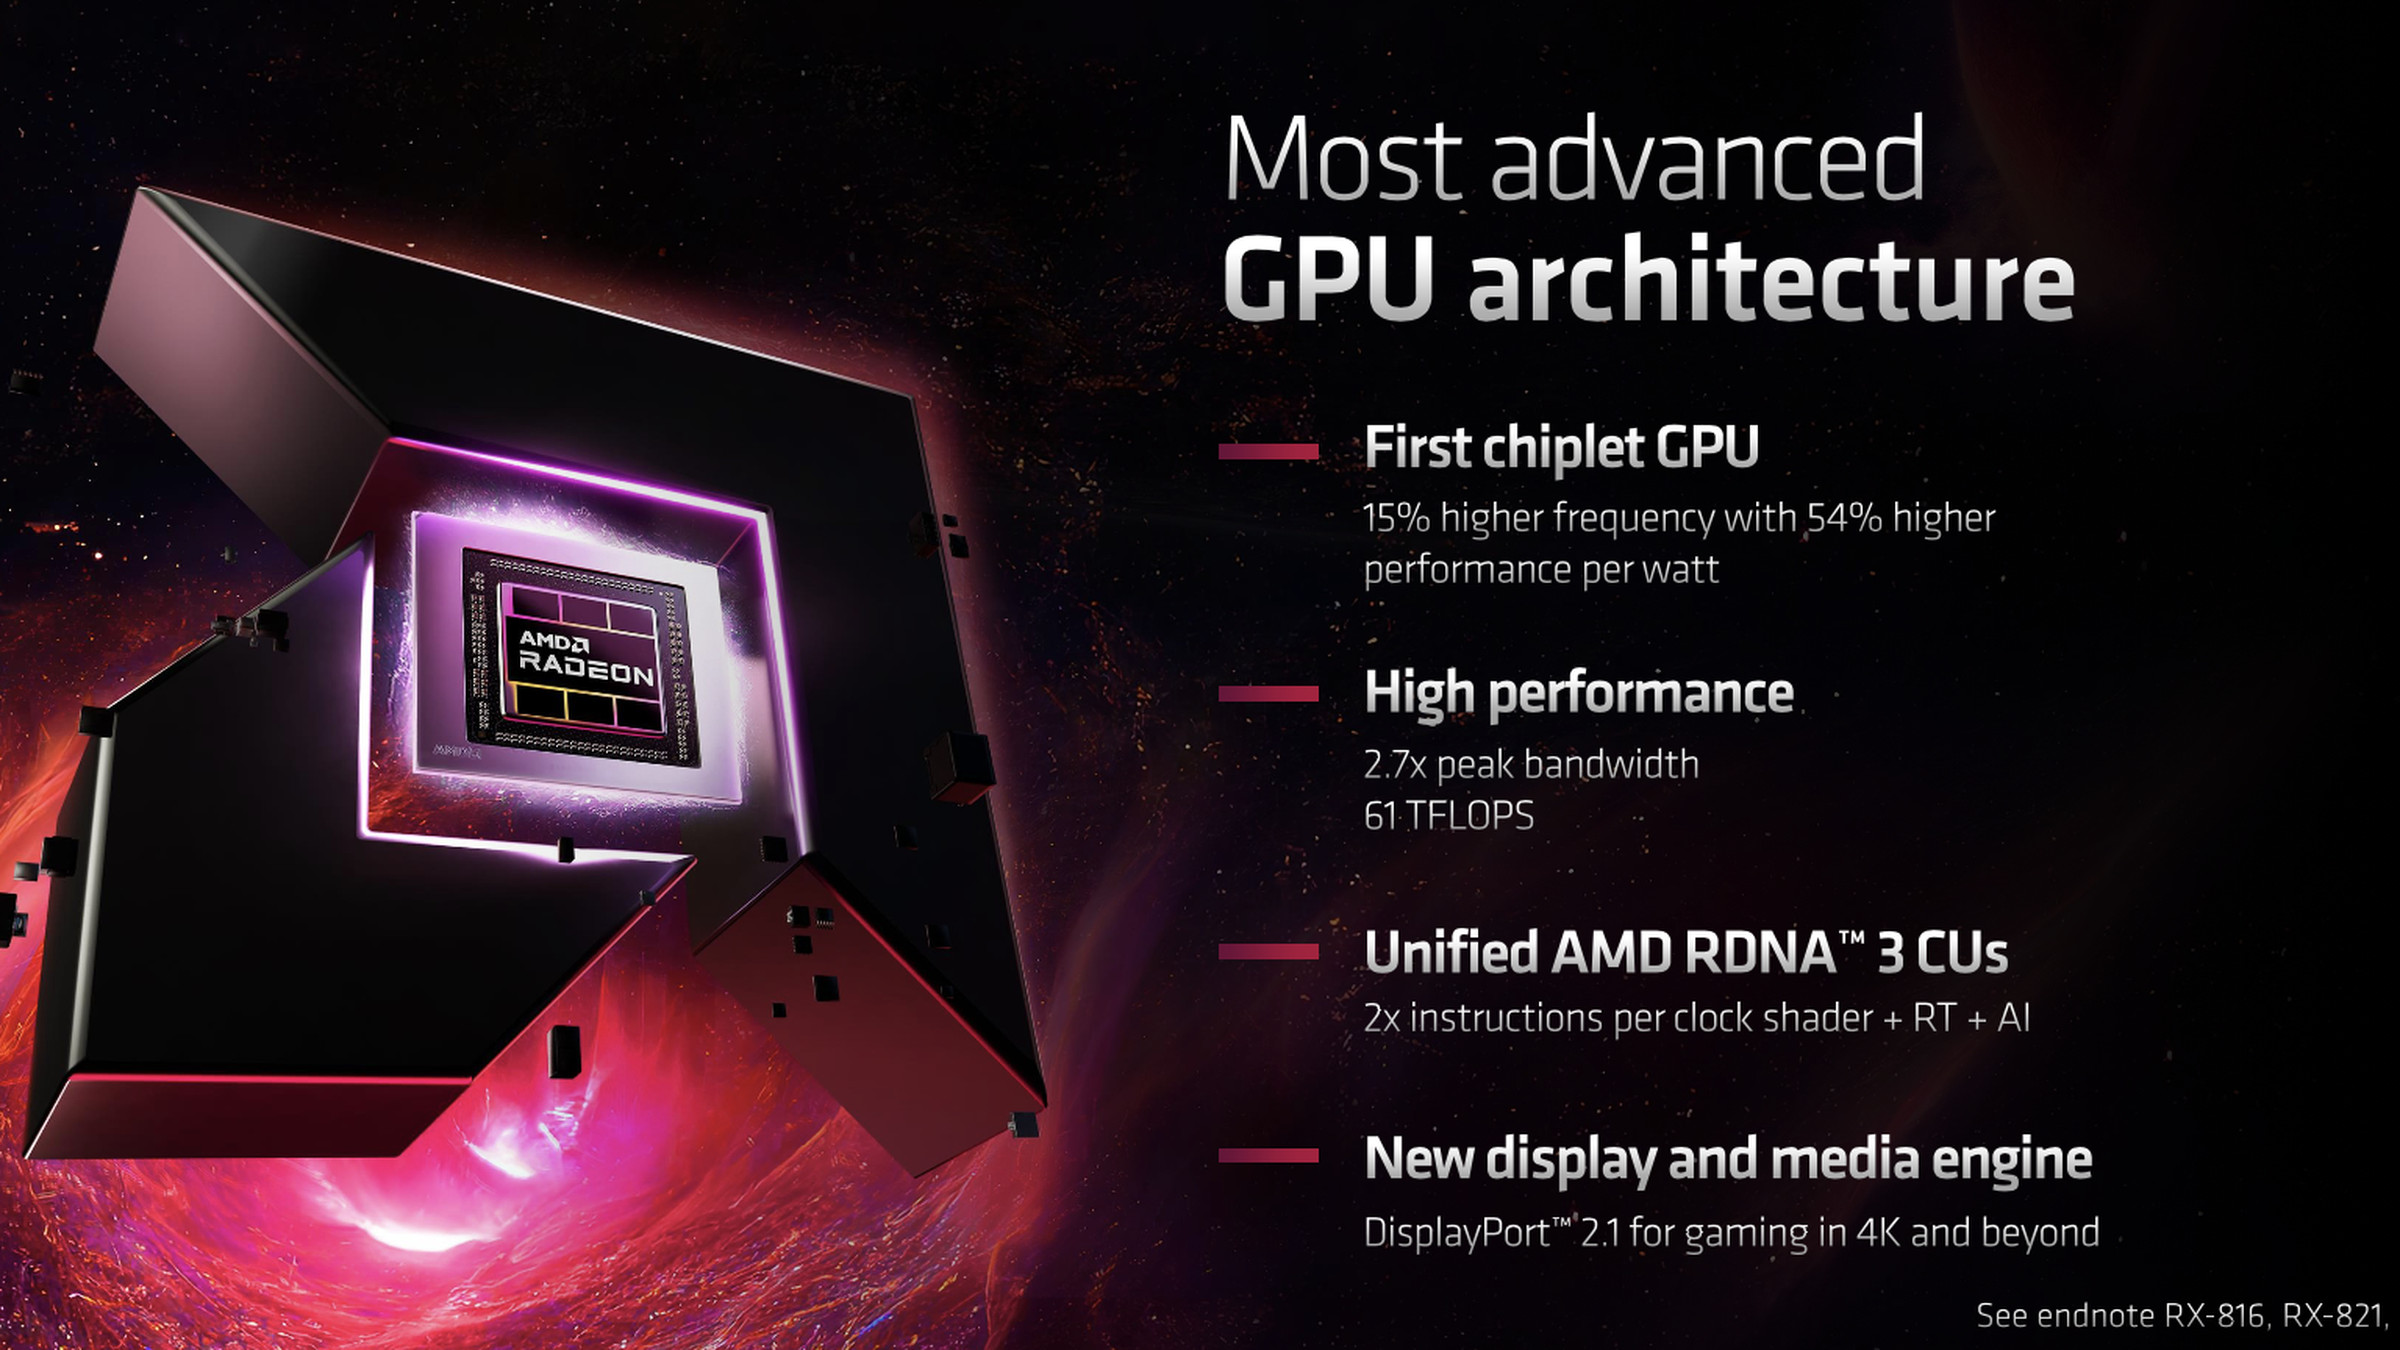 AMD seems very proud of RDNA 3, but it is slightly difficult to compare it to RDNA 2 just based on specs alone.